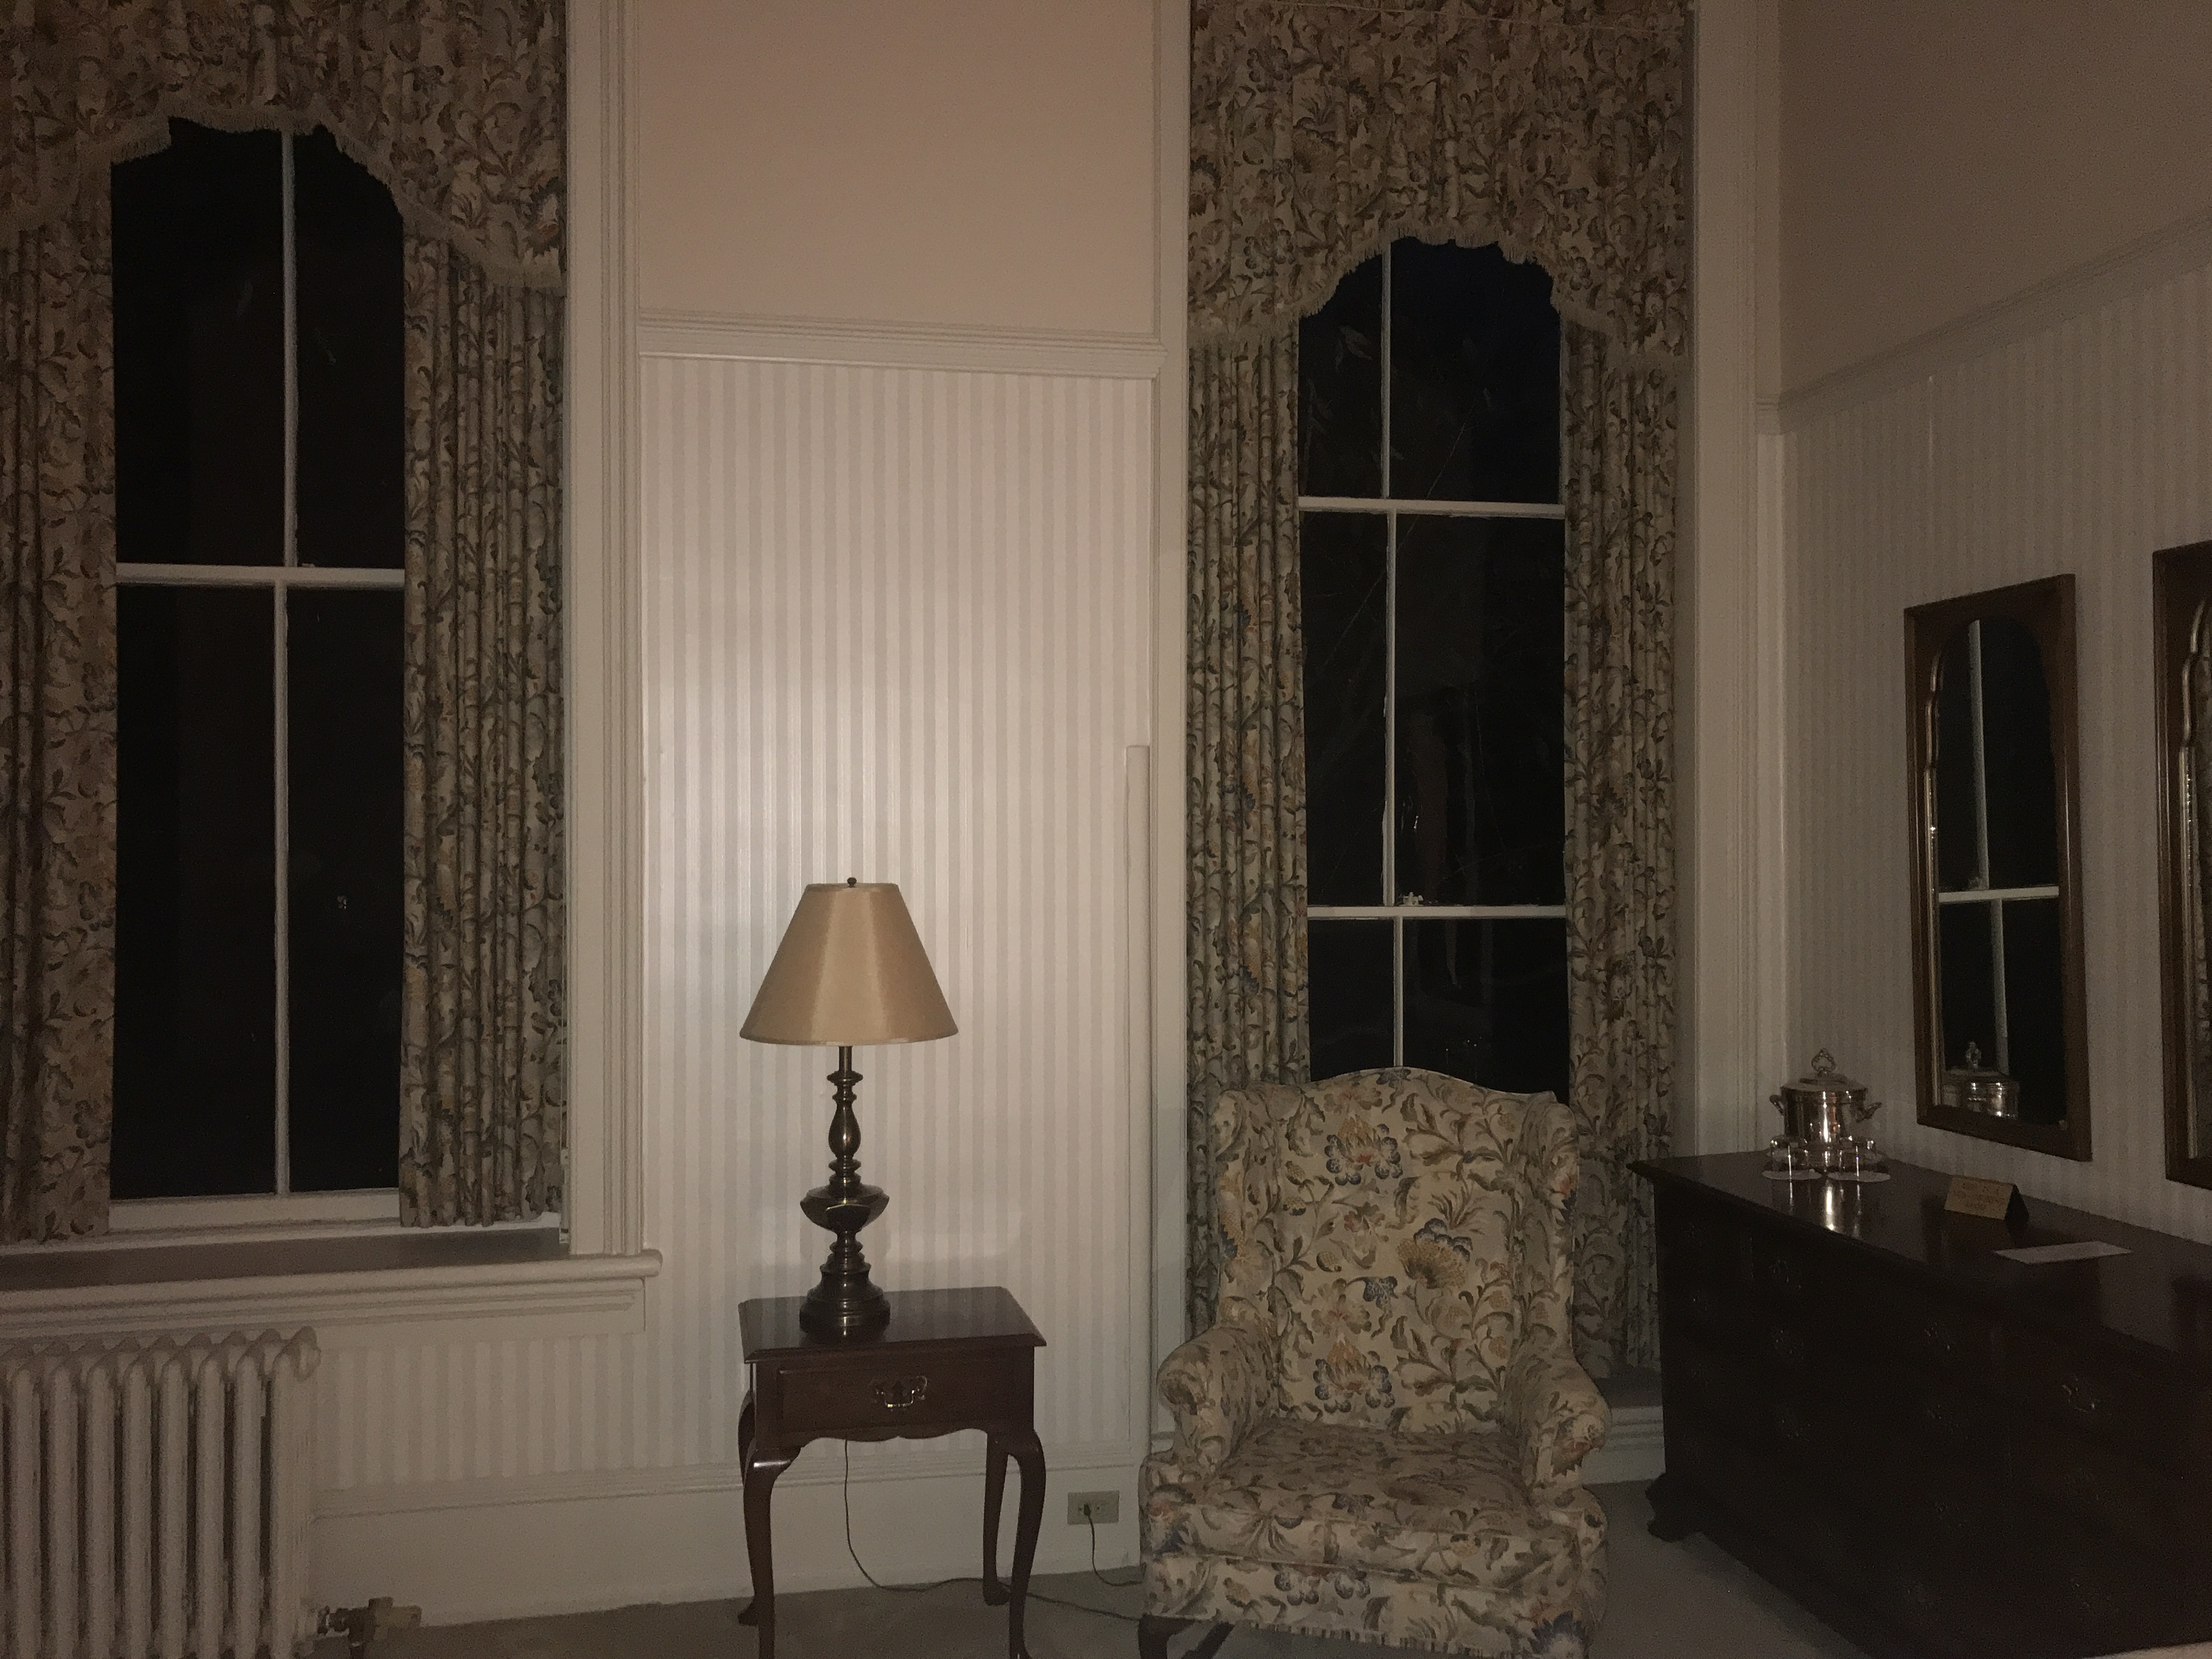 Oneida Room – A bedroom available for overnight stay in the Mansion House features very high ceilings, floral curtains, striped wallpaper, and an easy chair.